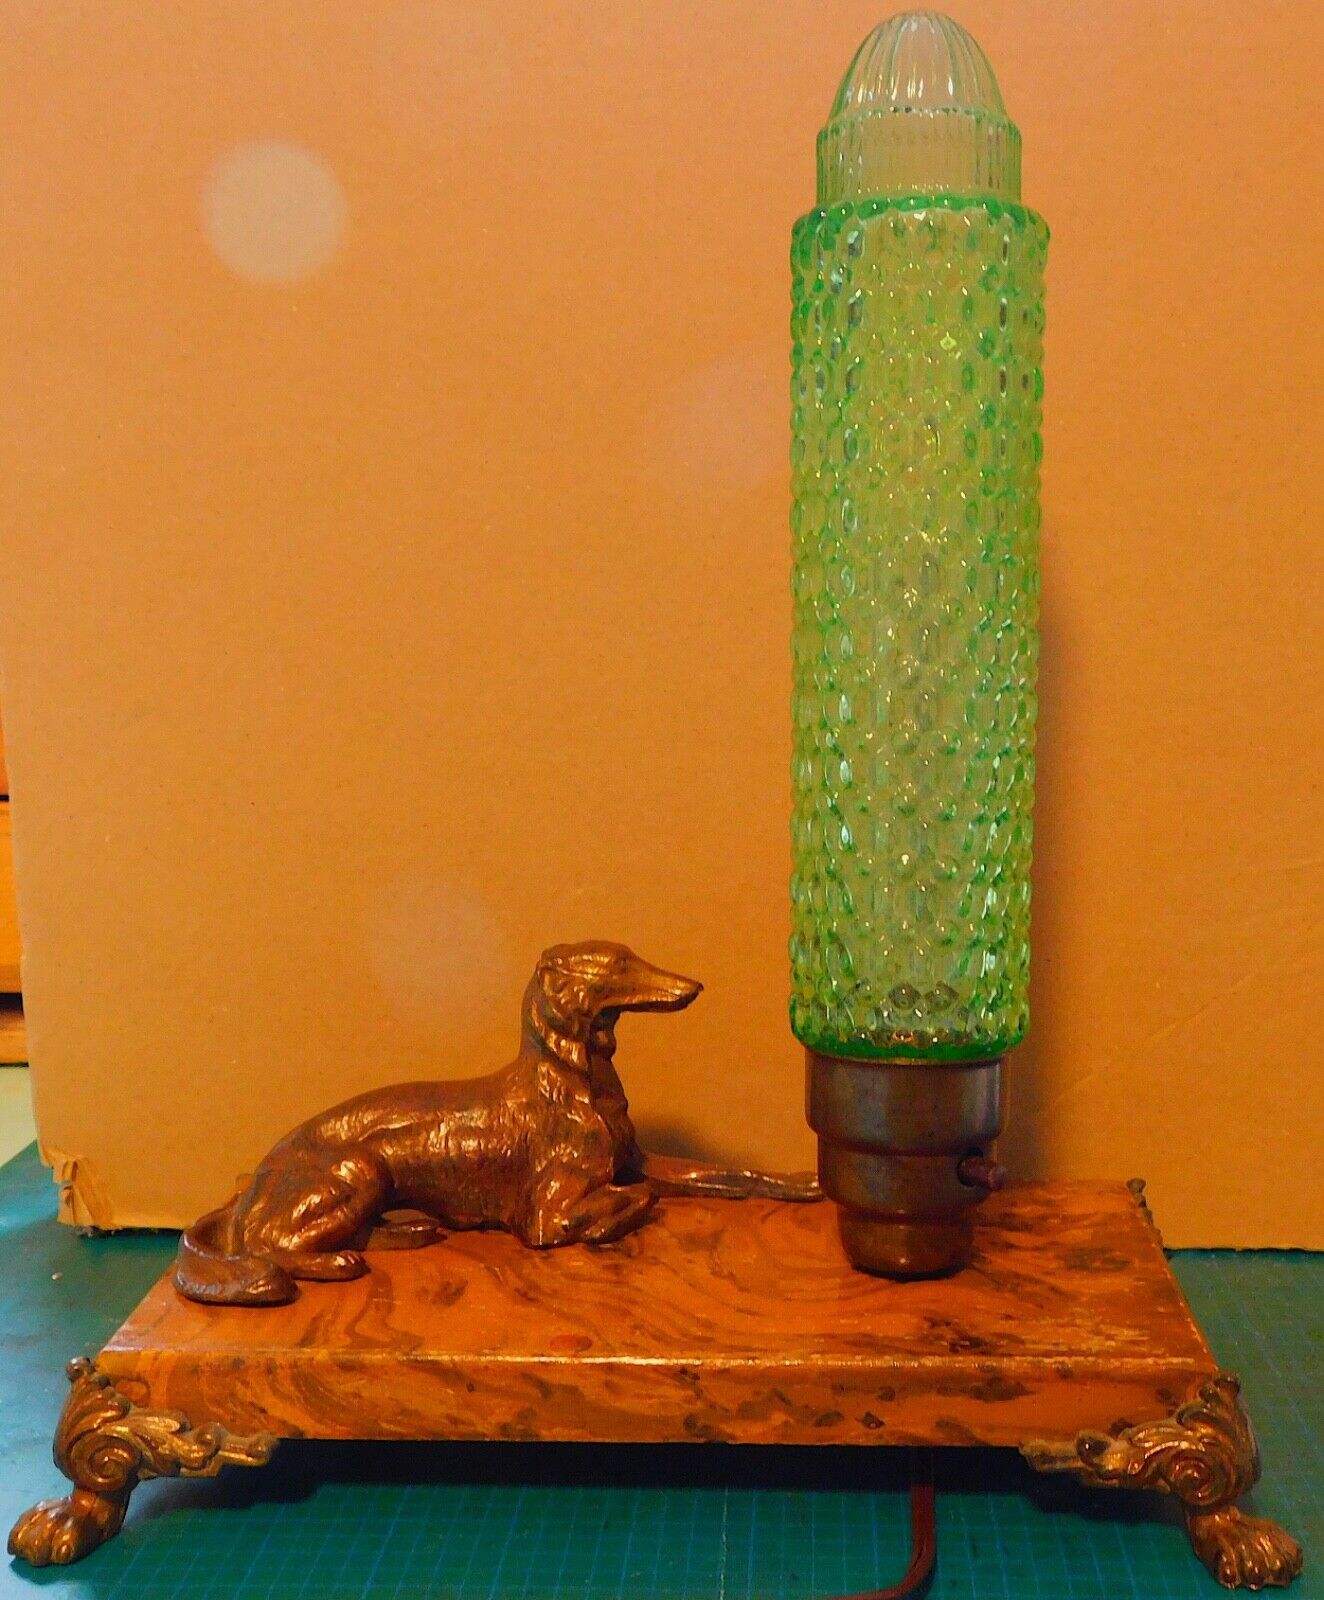 Vintage Art Deco Borzoi Dog Lamp With Metal Dog & Green Glass Cover Works